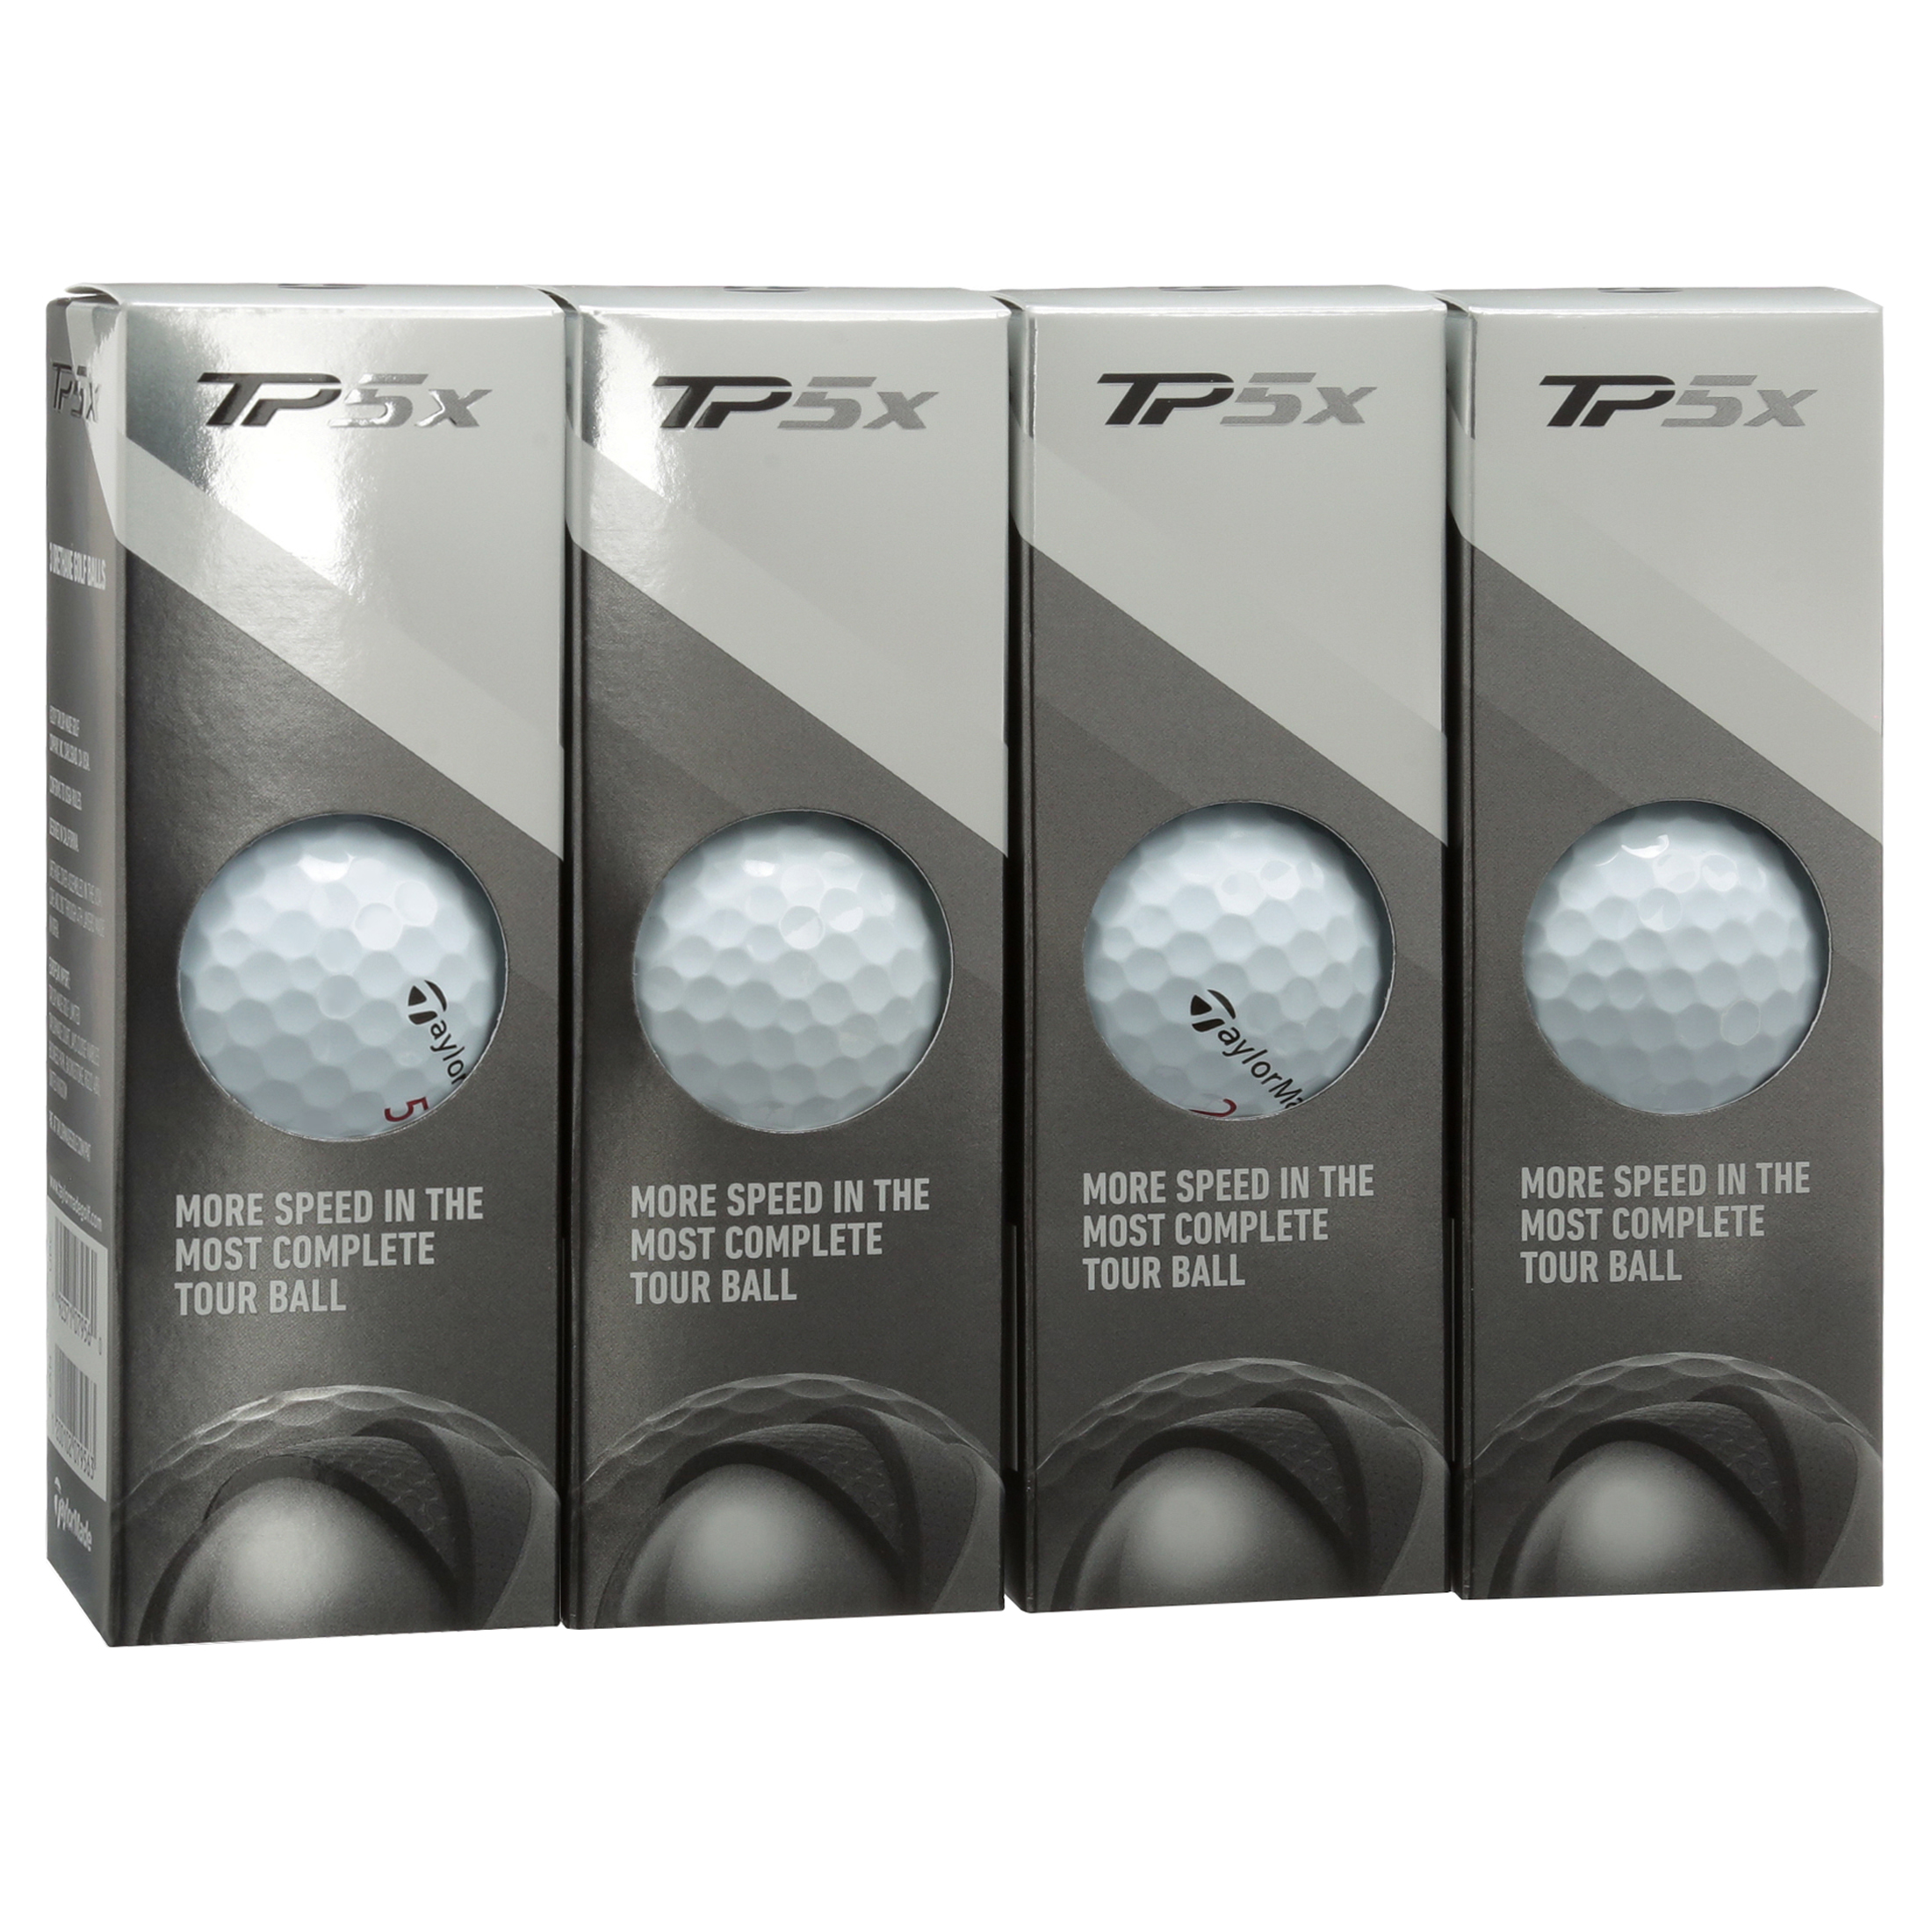 TaylorMade TP5x Golf Balls, 12 Pack - image 3 of 7